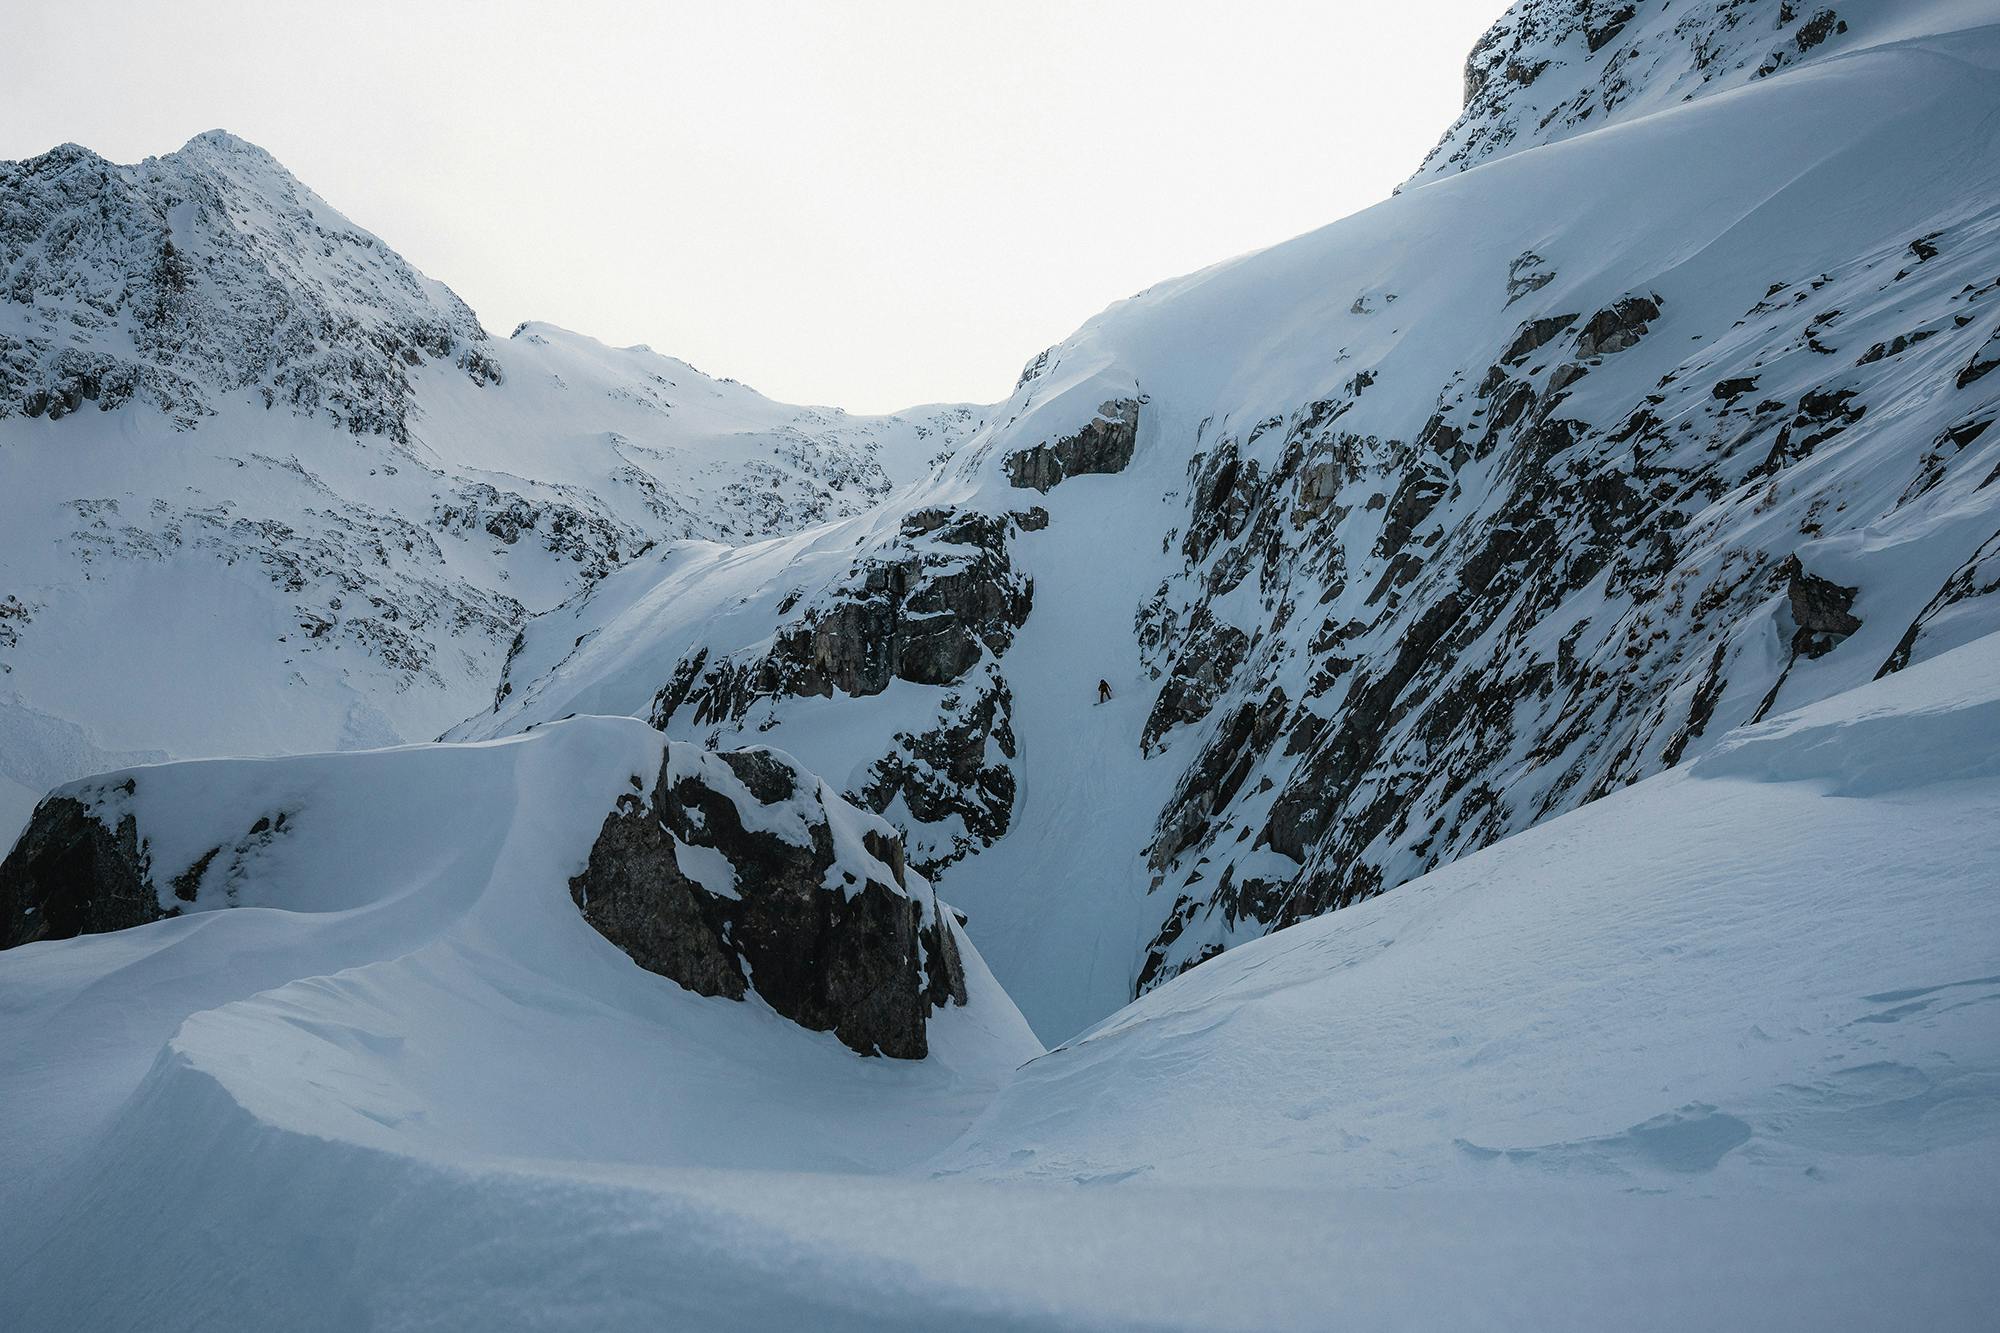 Snowboarder riding in a steep couloir